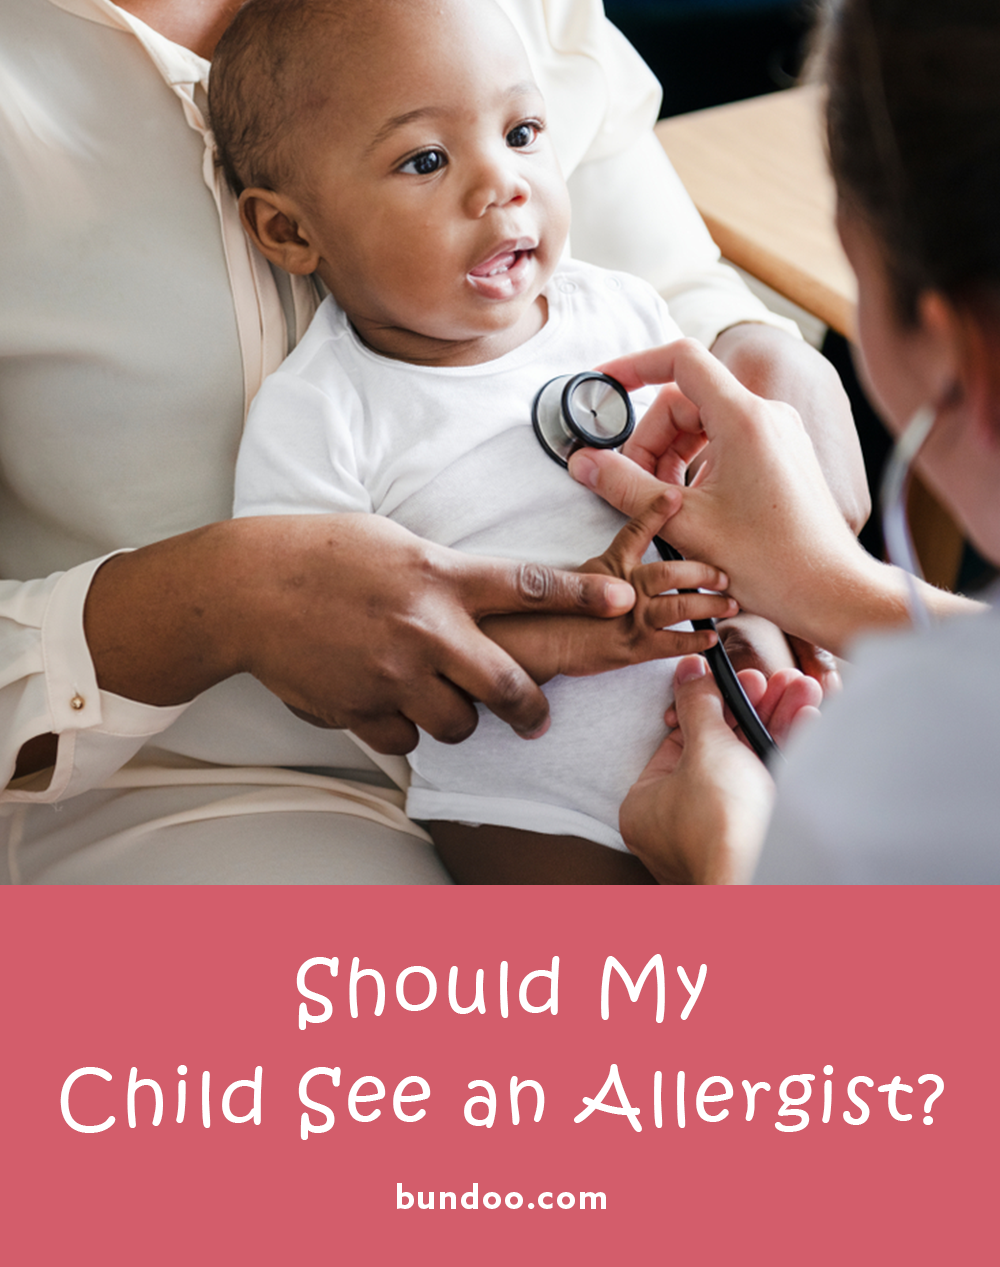 When you should visit an allergist